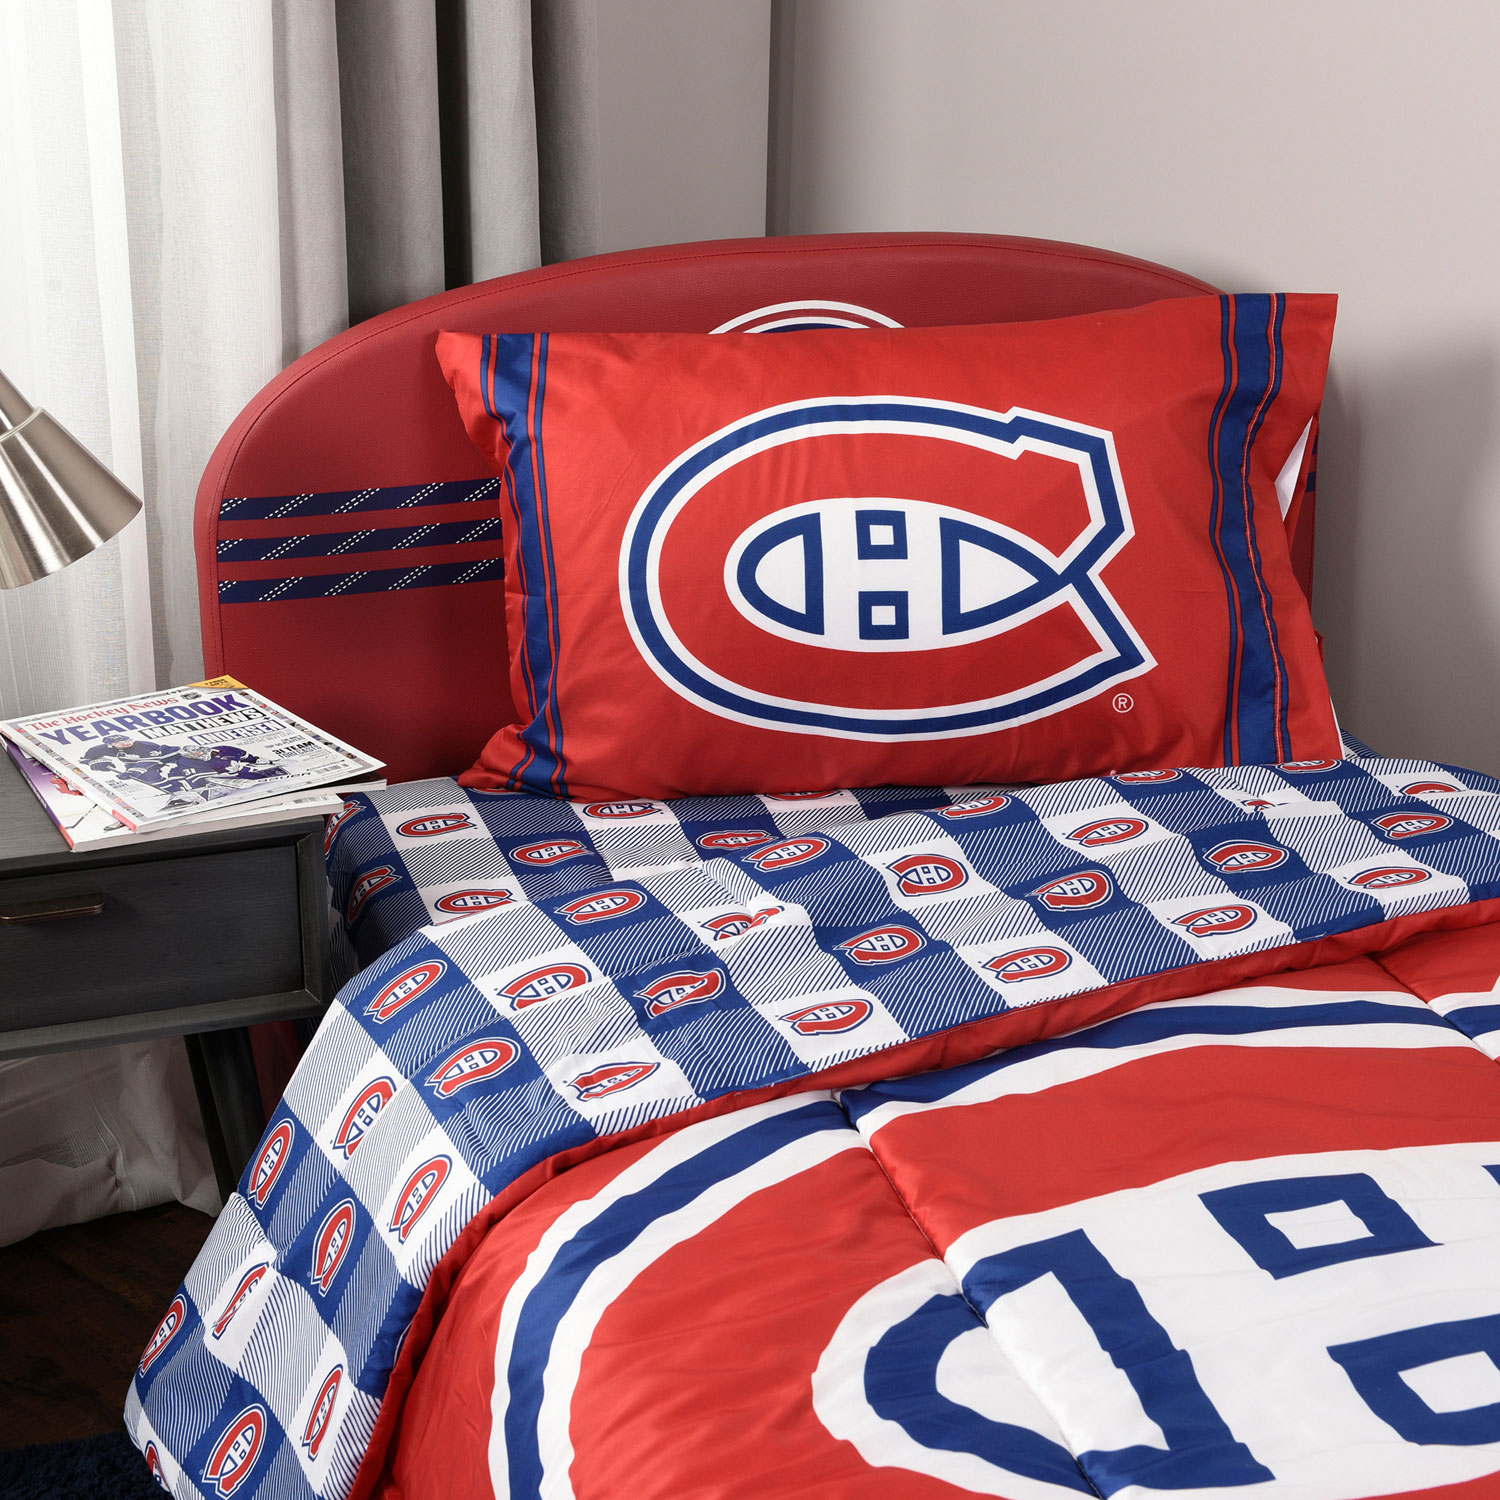 Nhl Twin Bedding Set Montreal, Nhl Twin Bed Sheets